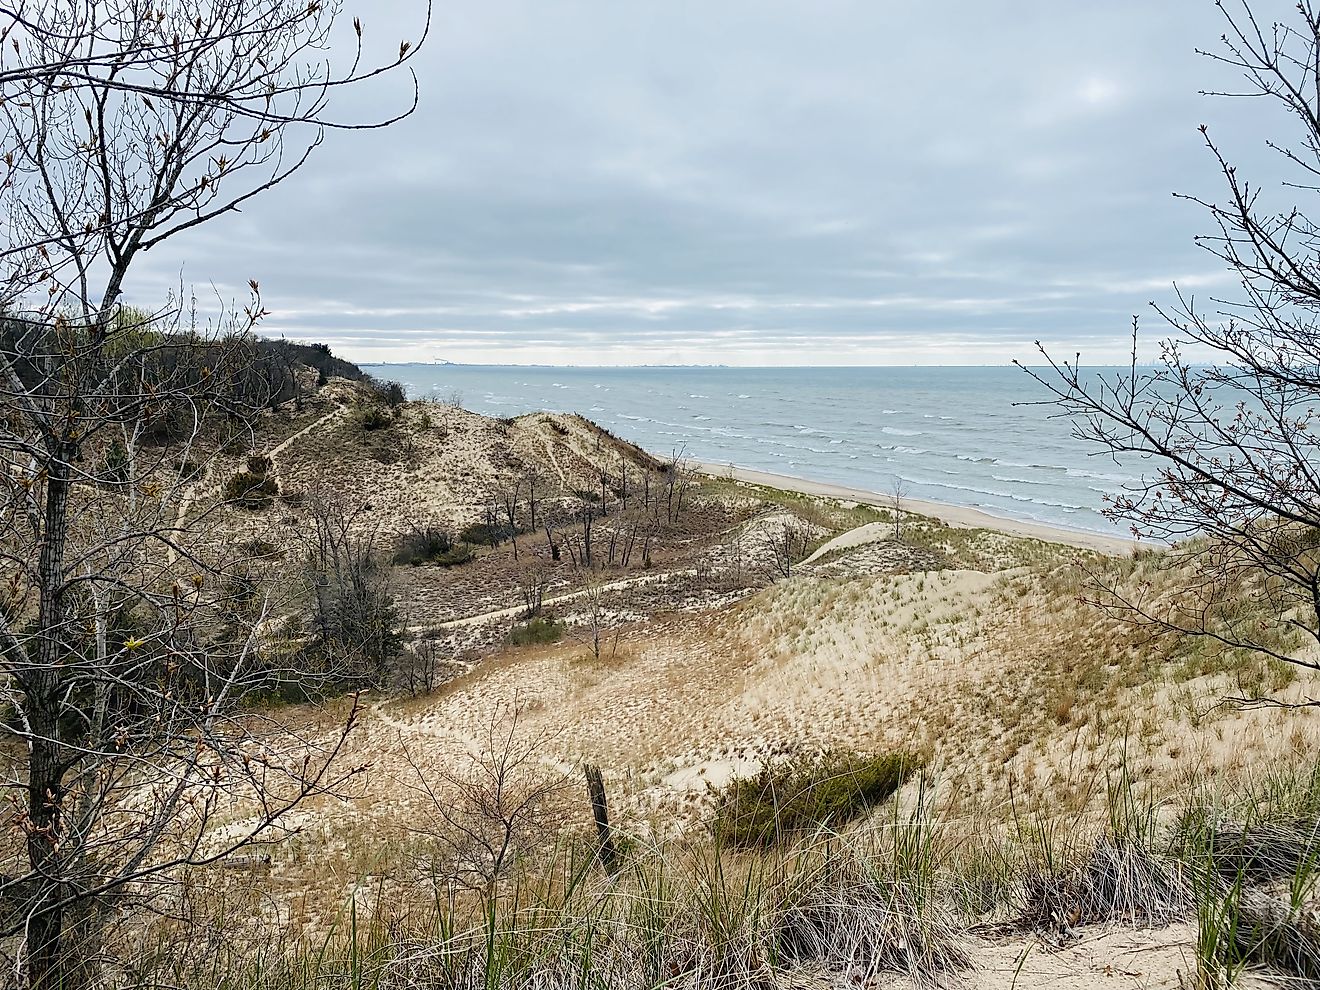 Slim trails skirt through the rugged, grassy sand dunes of Indiana's Lake Michigan shore. A cloudy day, but a beautiful day. 